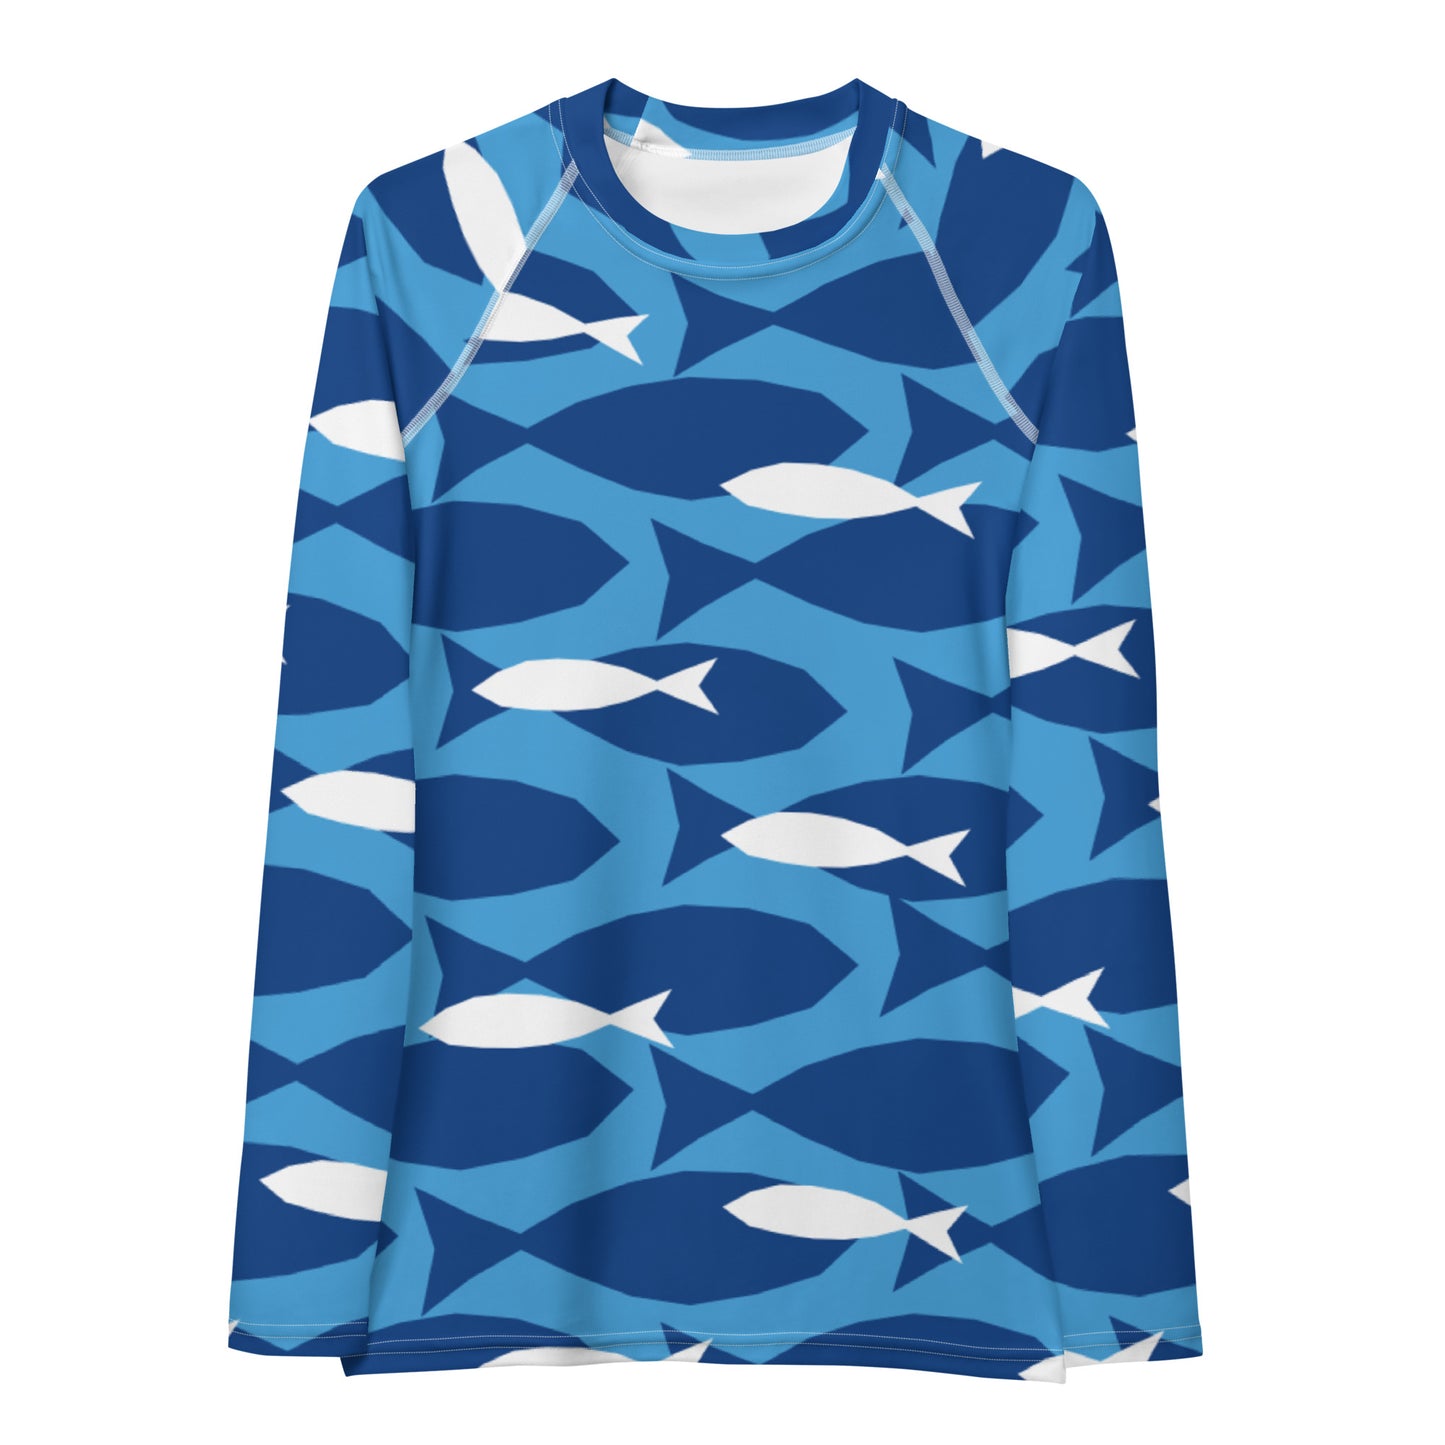 Special Edition - Love of the Ocean Blue Fish Women's Rash Guard